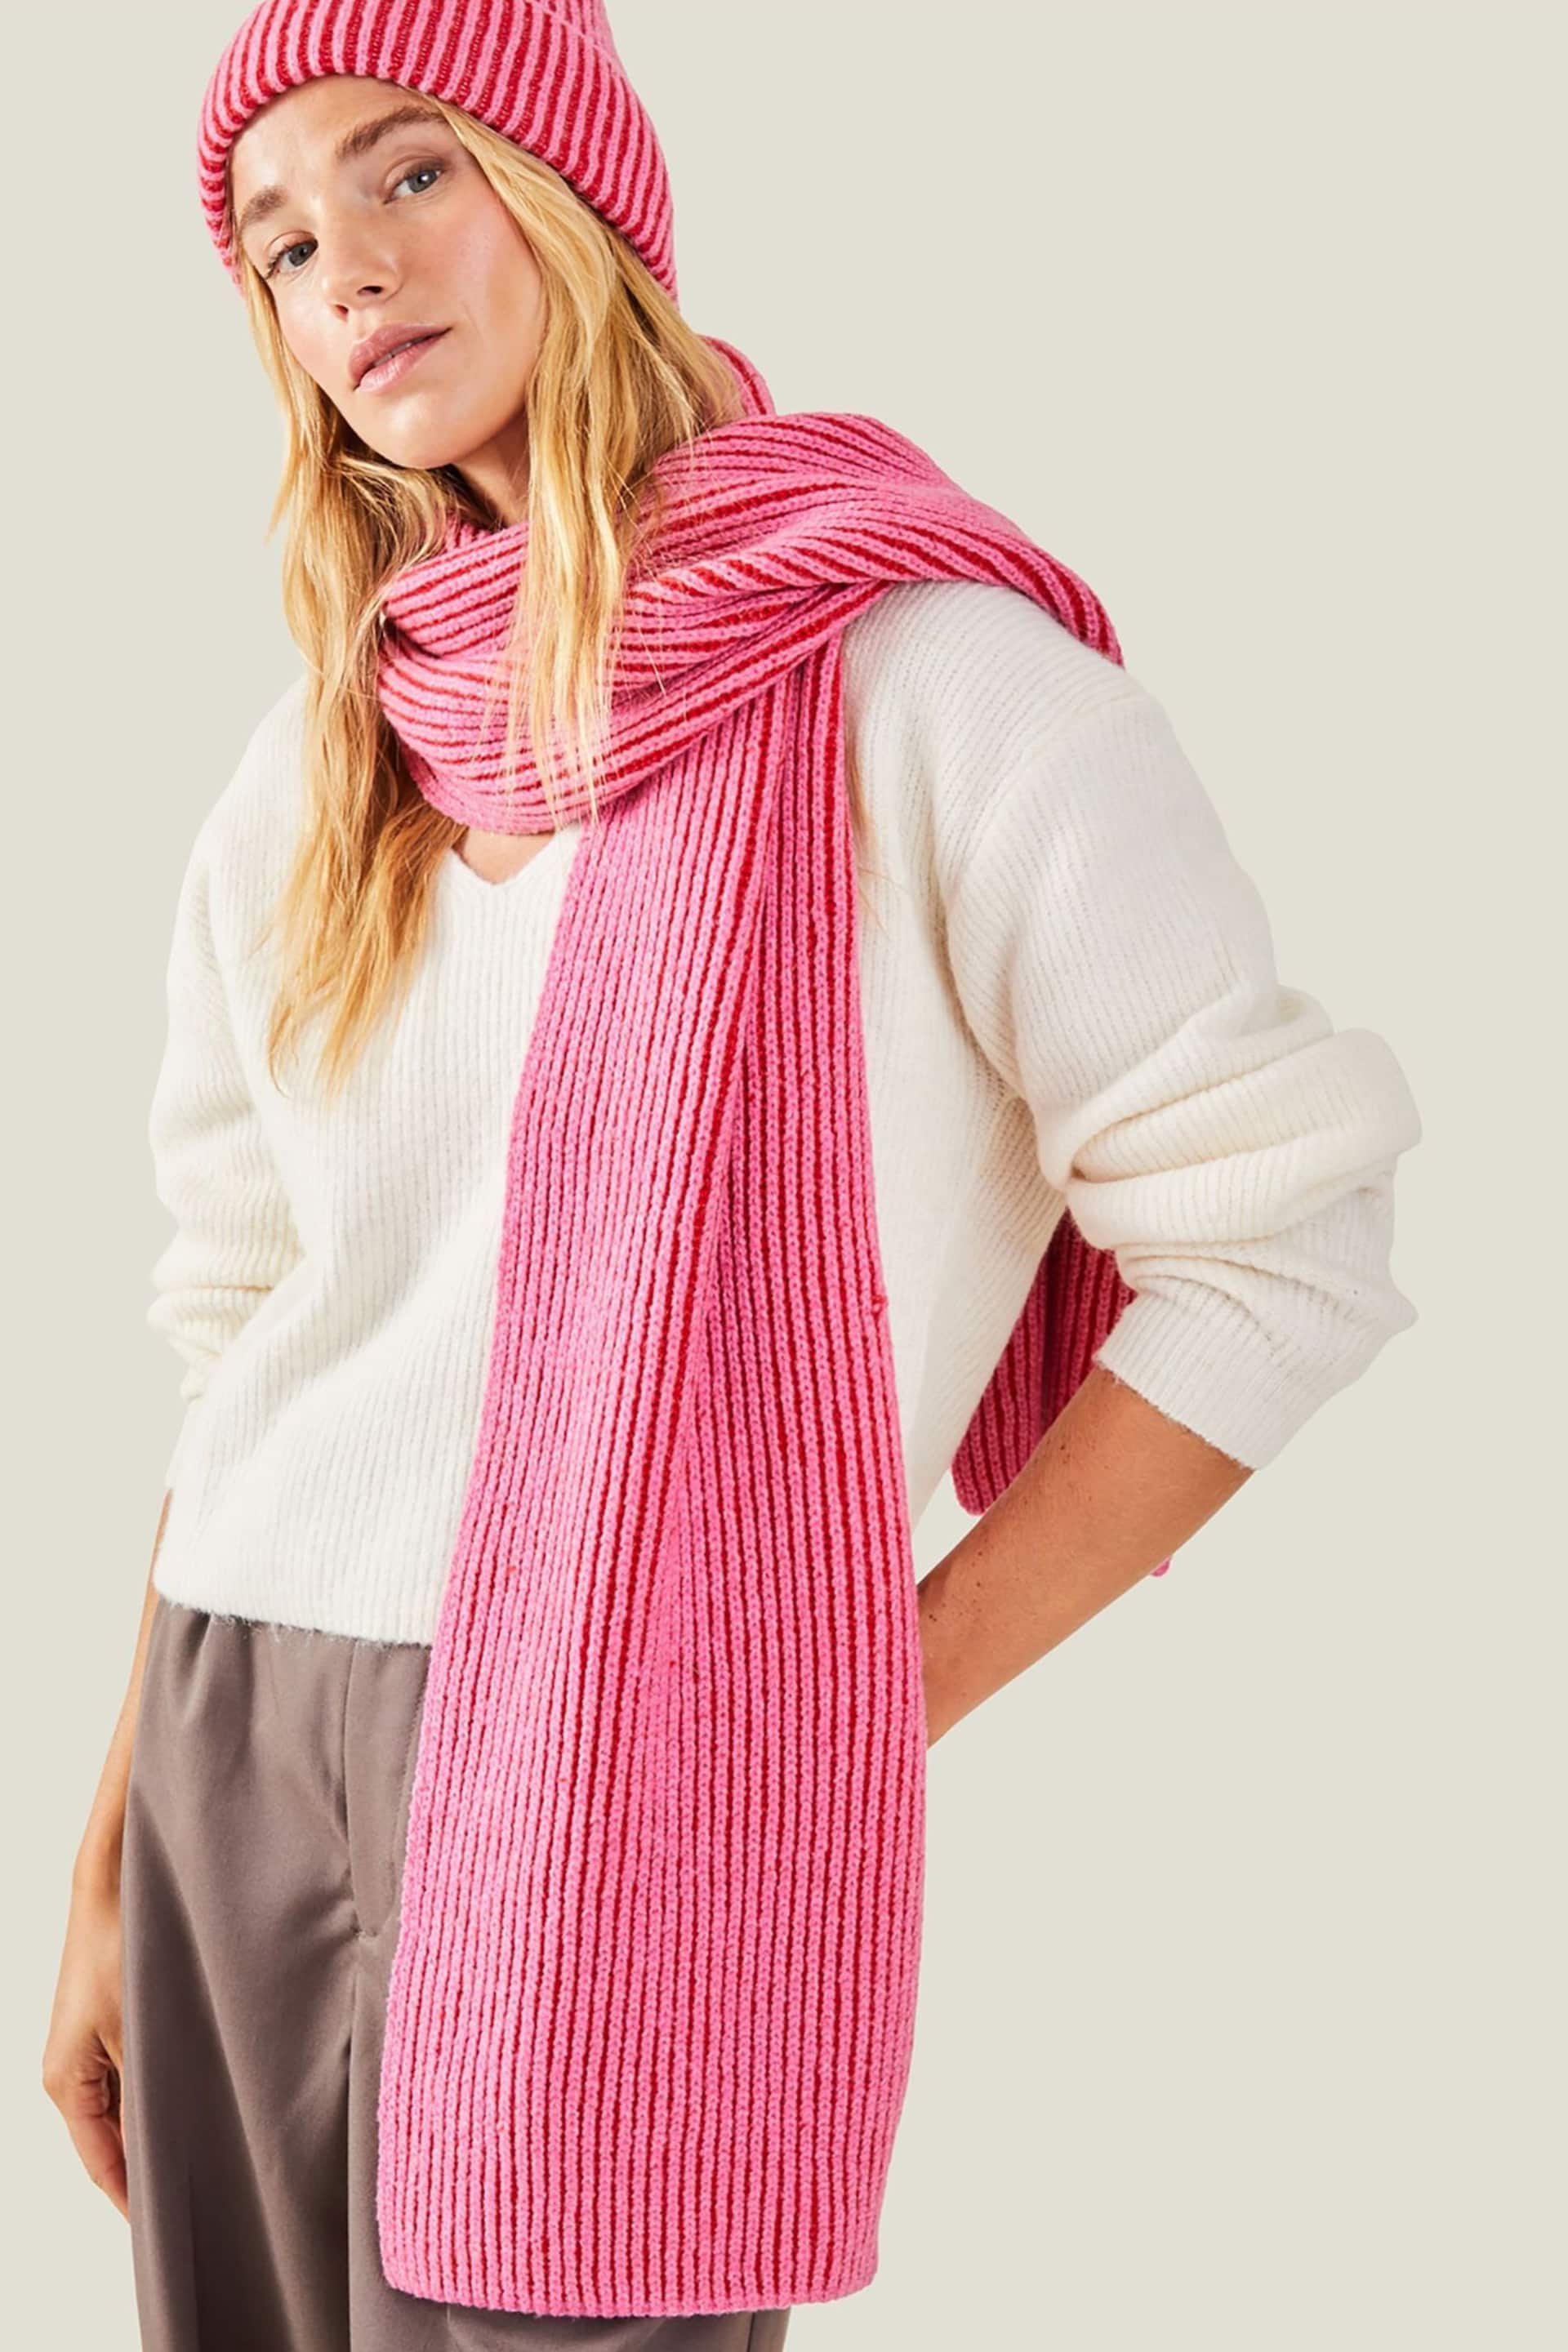 Accessorize Pink Paris Knit Scarf - Image 3 of 3